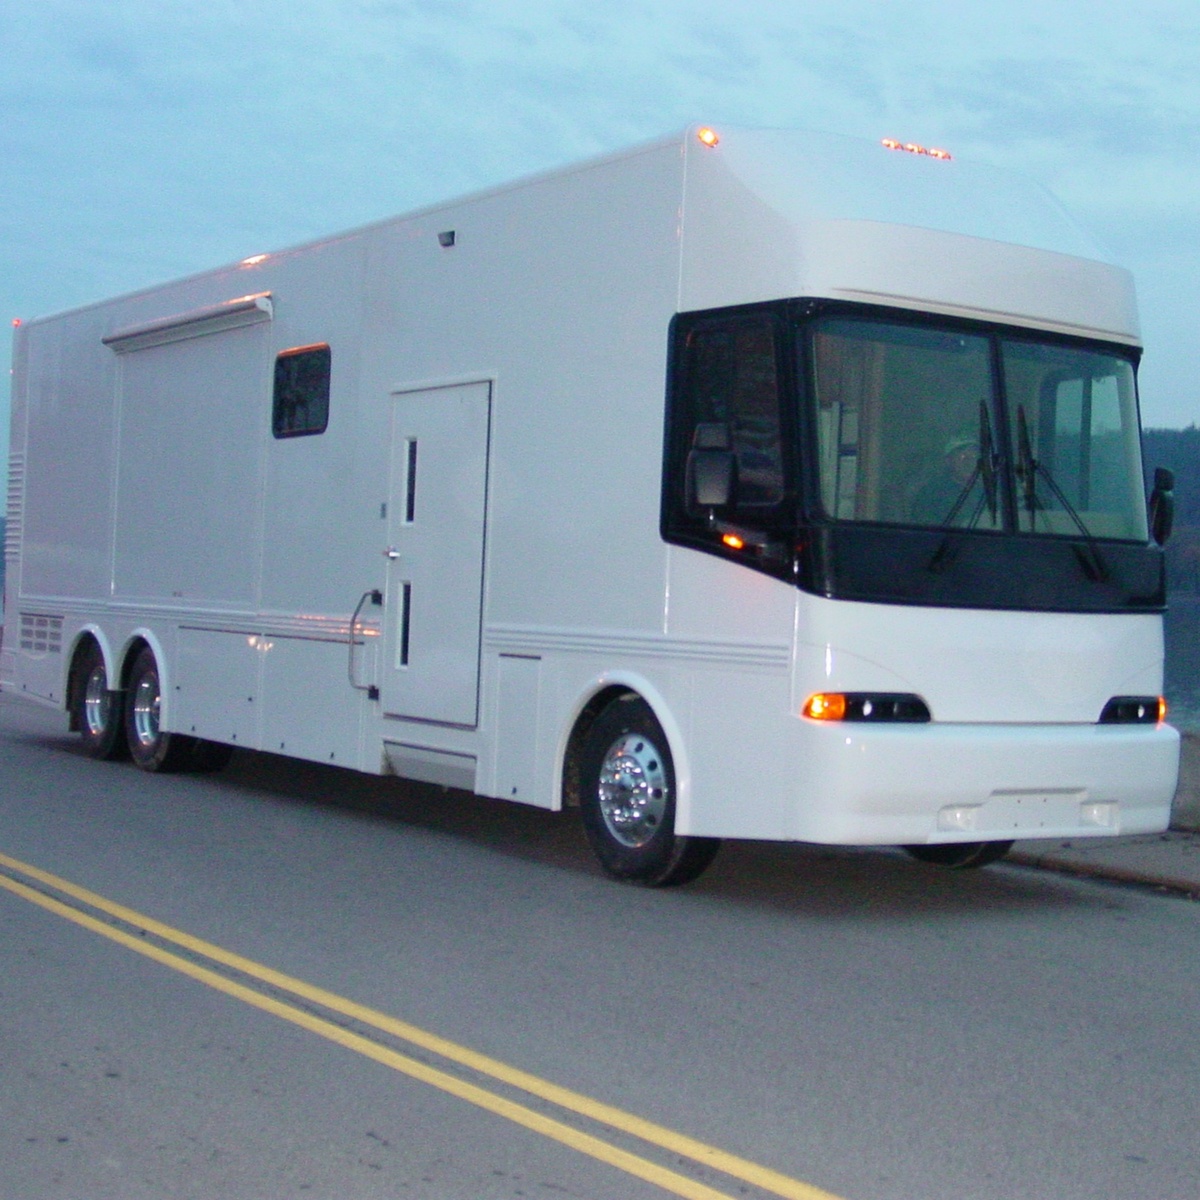 What is the role of a Mobile Health Screening Coach?